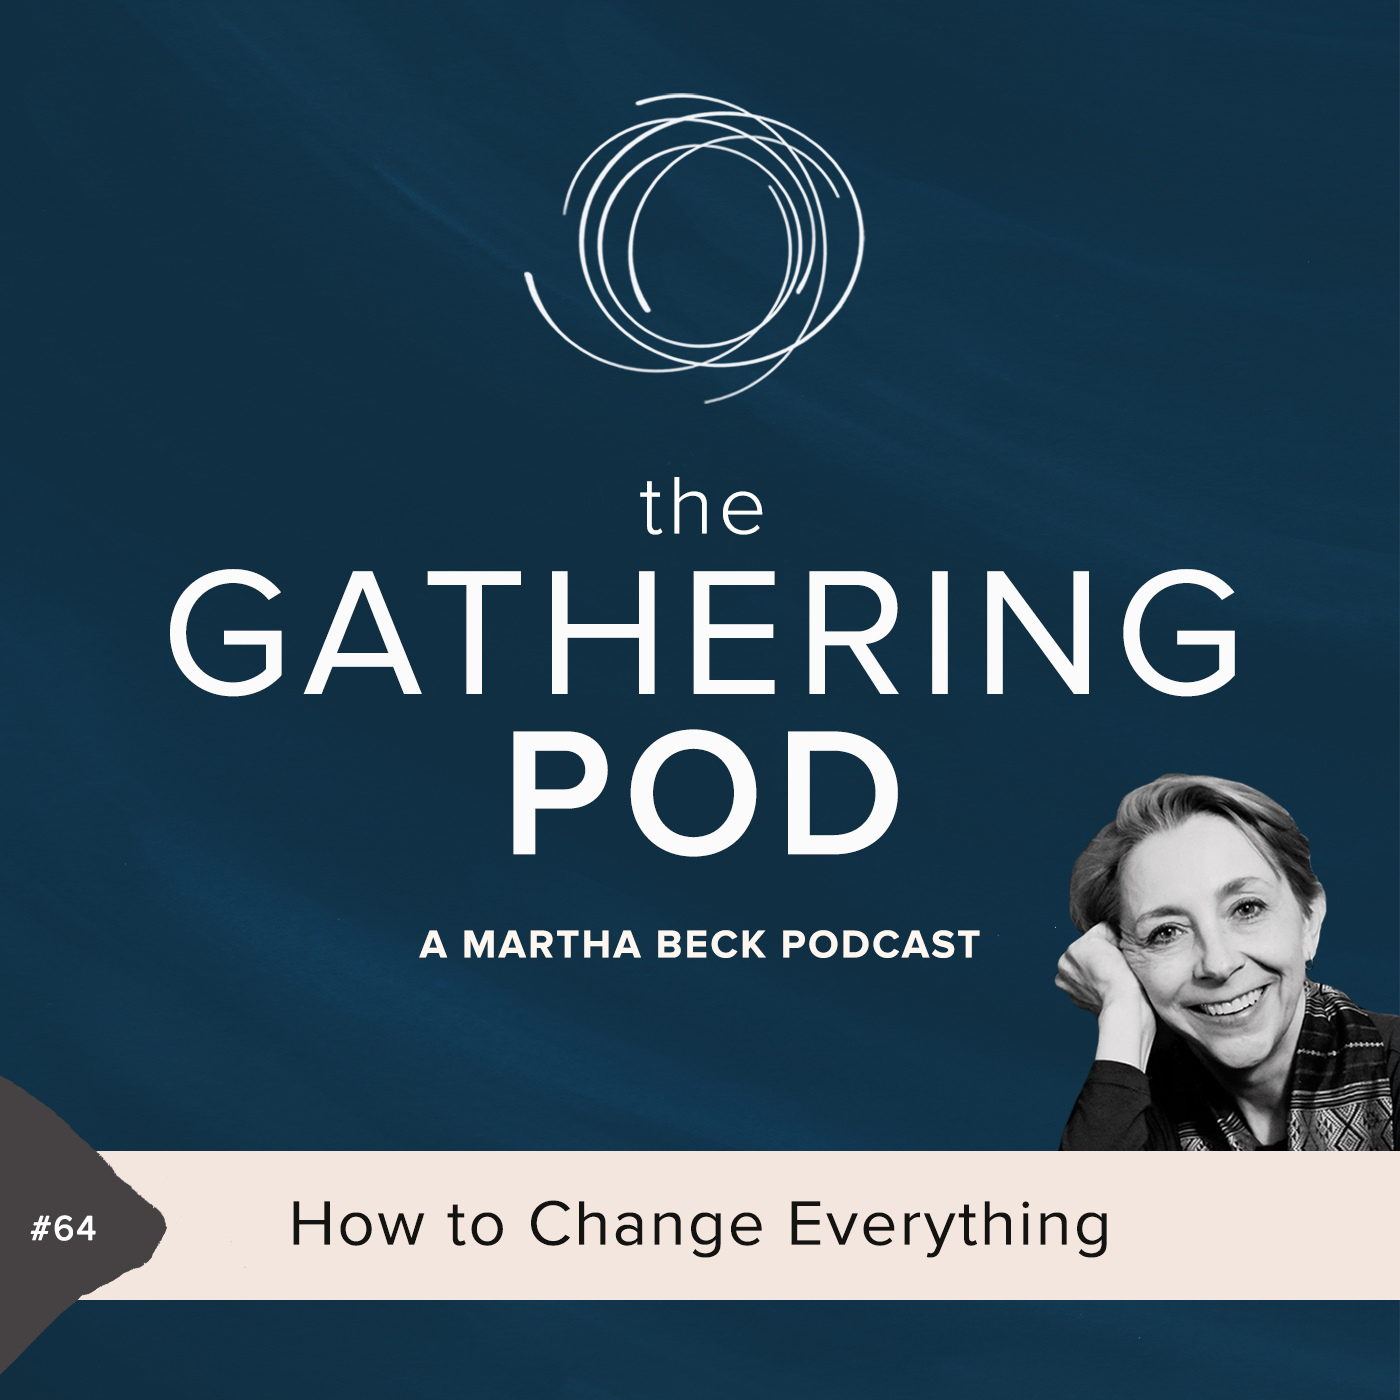 Image for The Gathering Pod A Martha Beck Podcast Episode #64 How to Change Everything